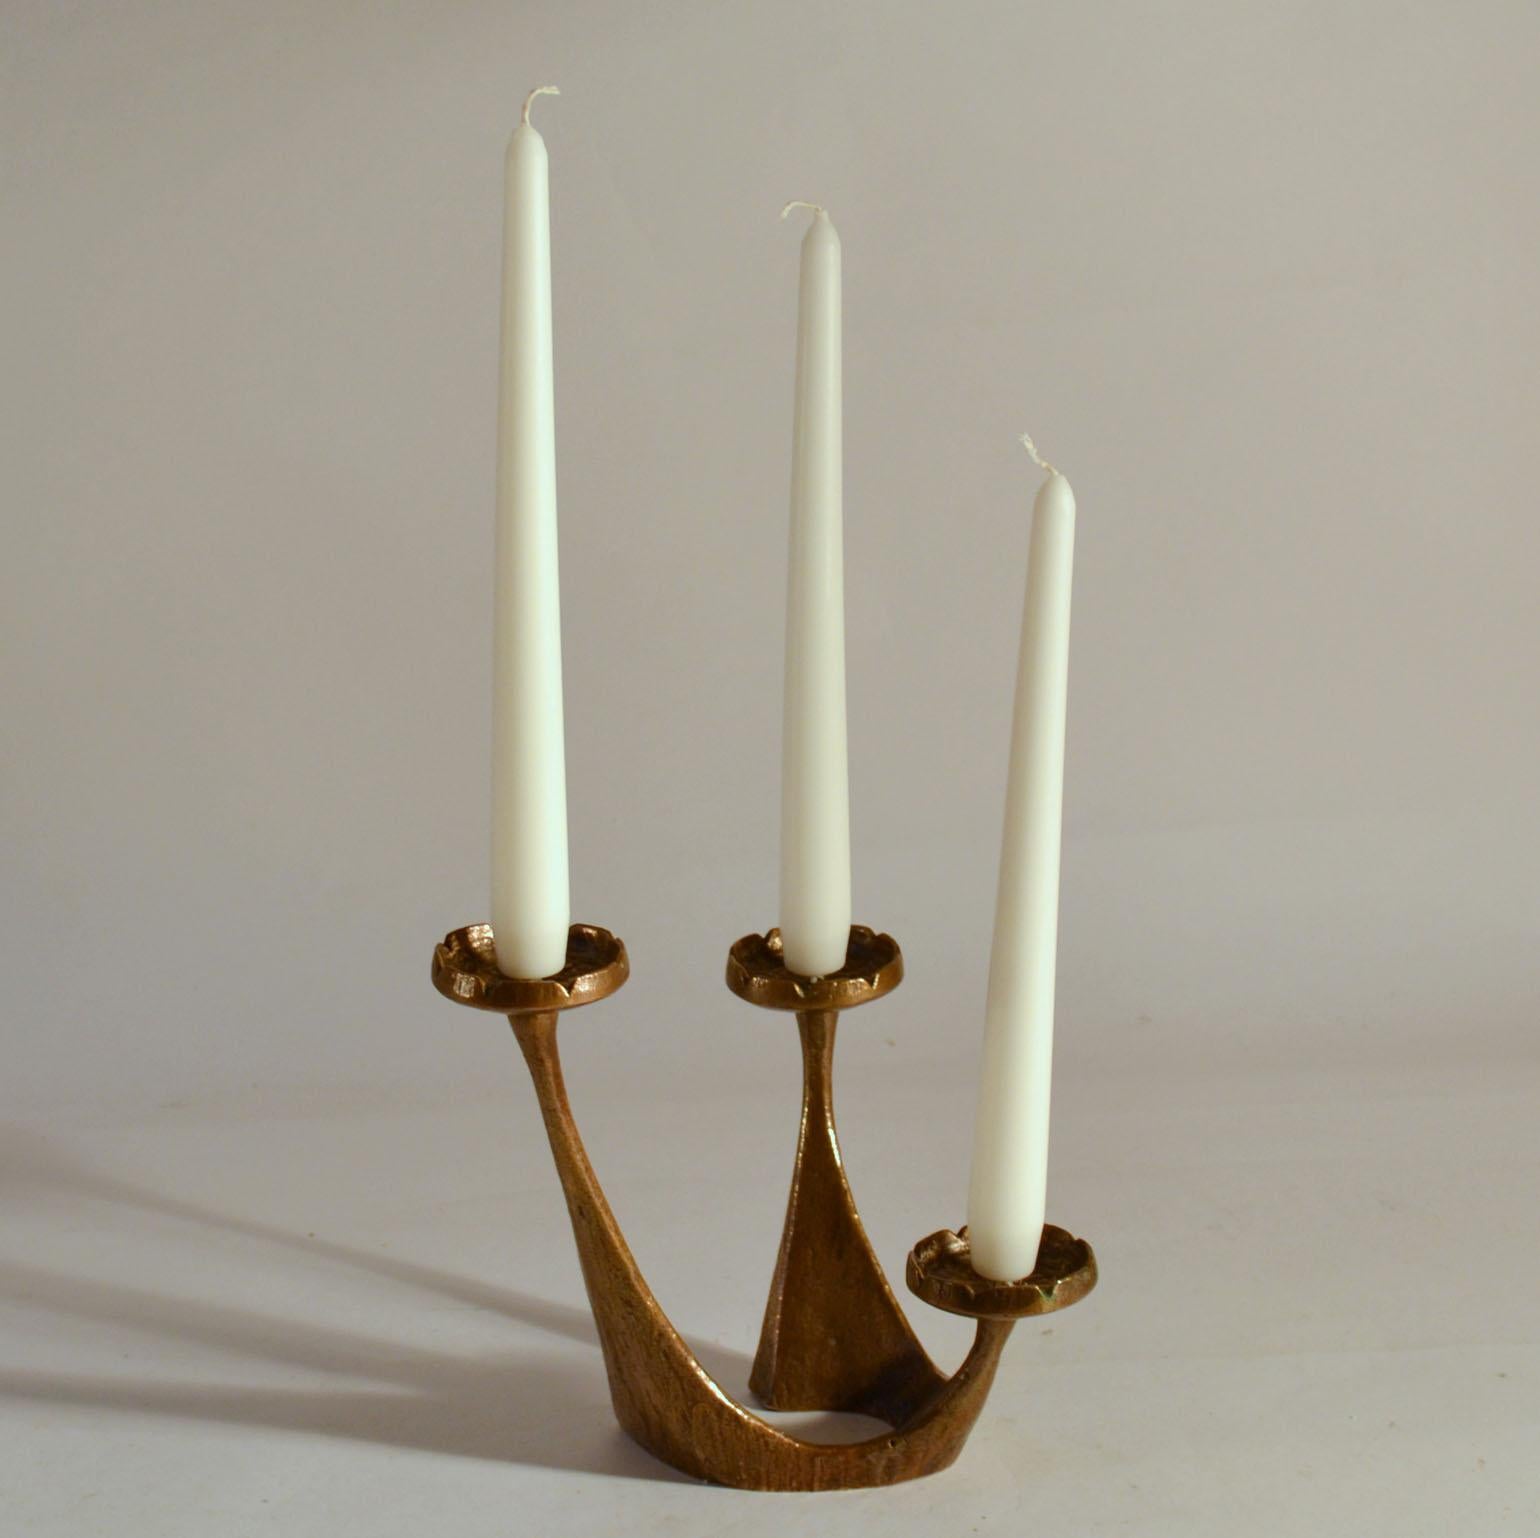 Mid-Century Modern freeform bronze cast three-arm candleholder with soft curves and lines. Three arms on descending heights hold regular size to maximal 4 cm diameter candles.